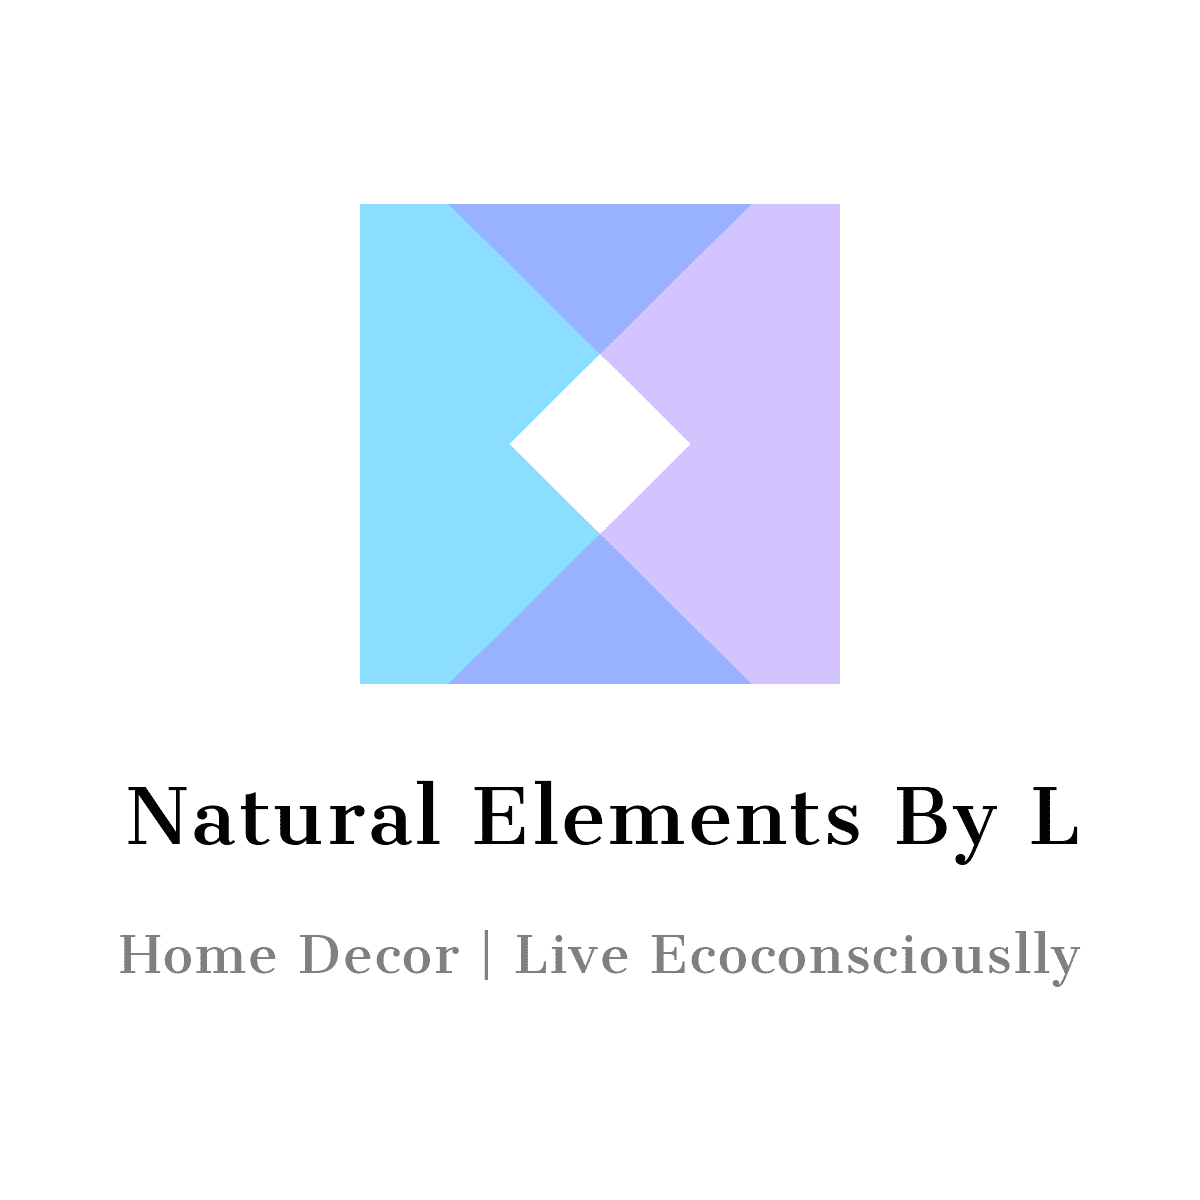 Natural Elements By L